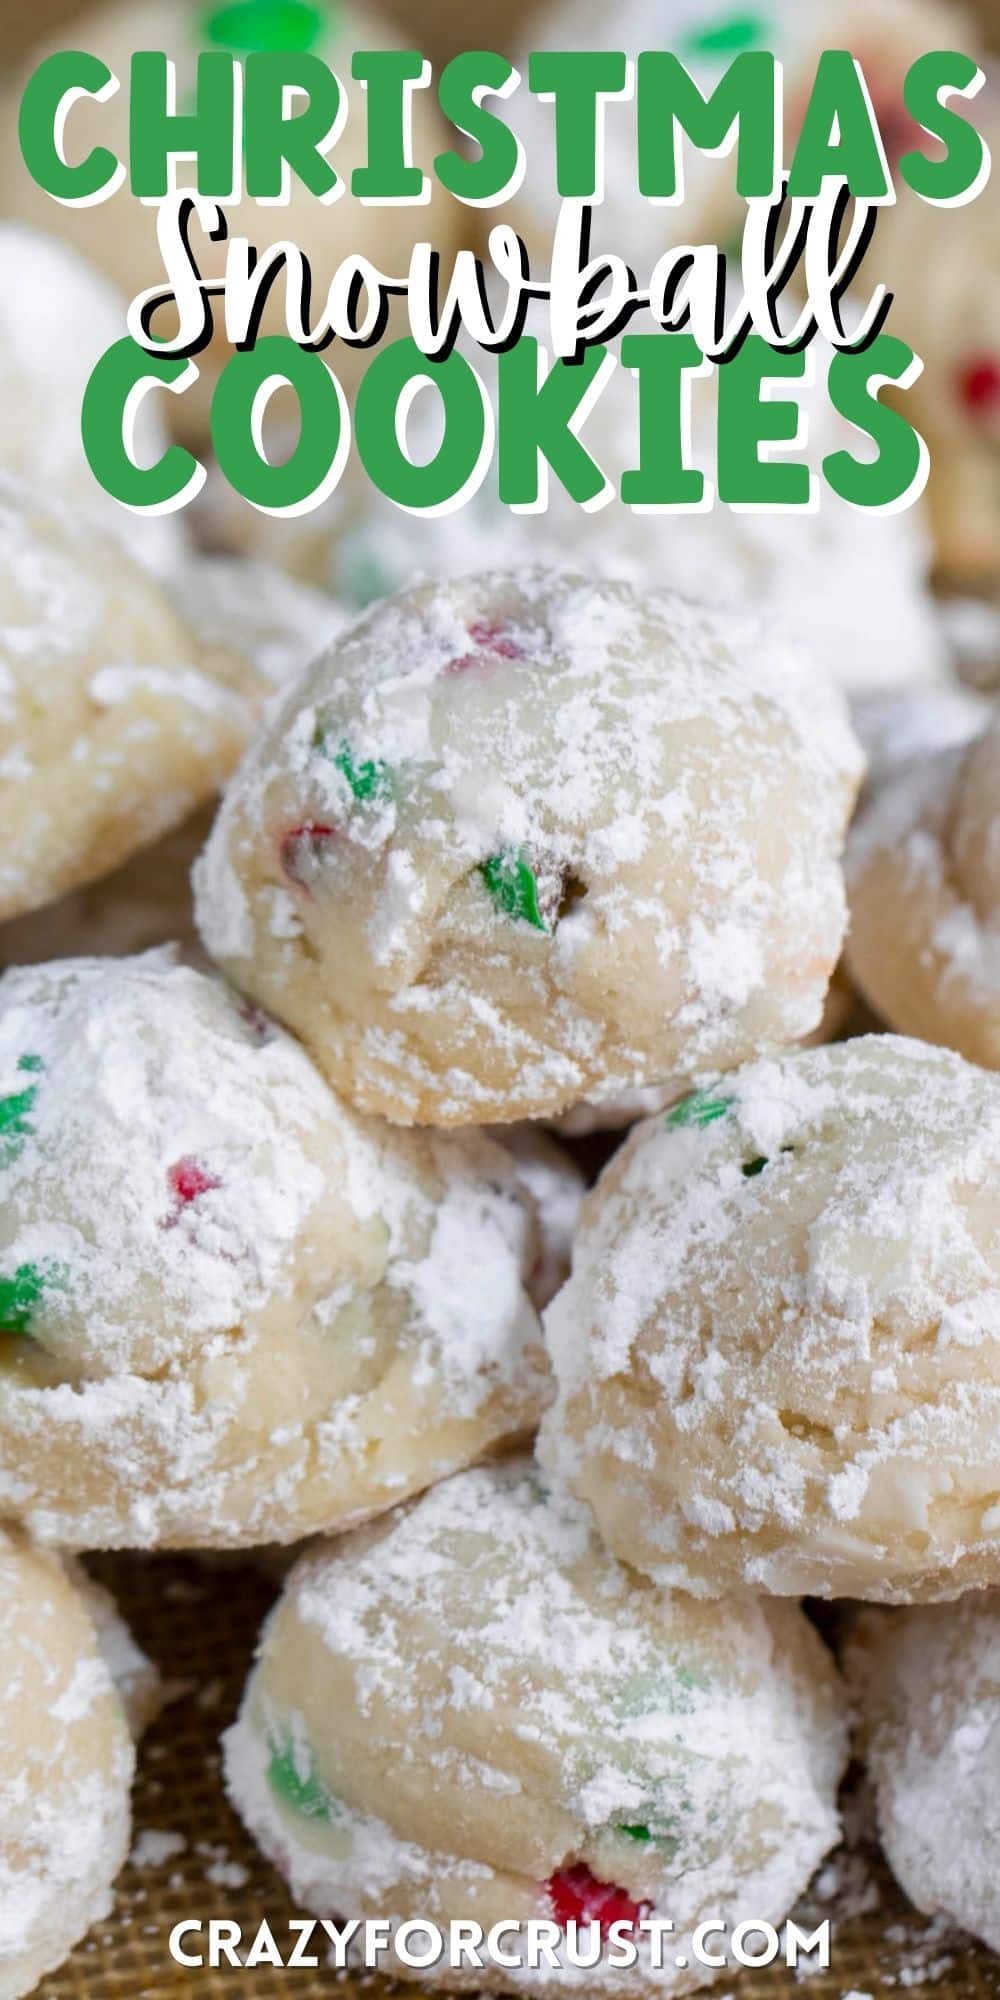 snowballs covered in powdered sugar with red and green m&ms baked in with words on top of the image